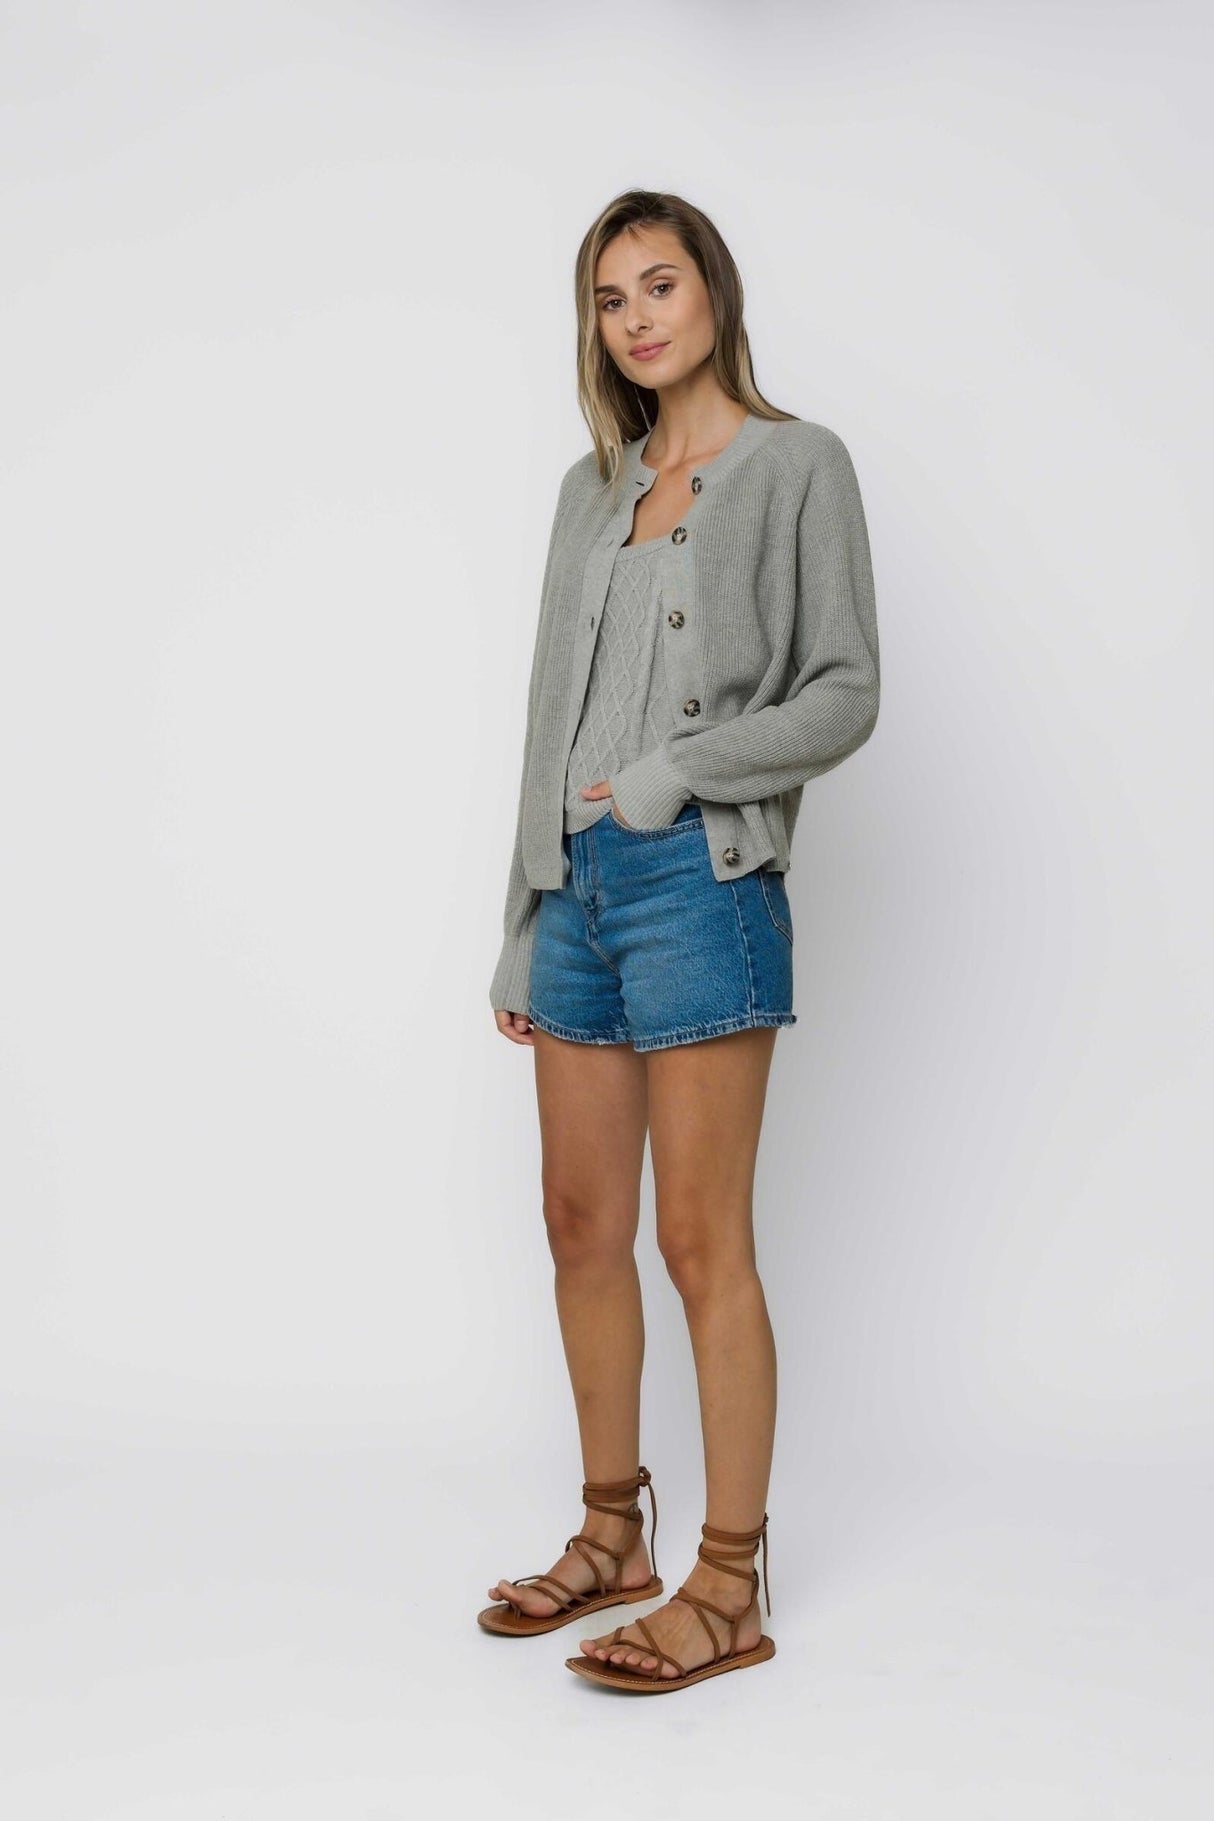 Orb Women's Mia Lightweight Cardigan - A&M Clothing & Shoes